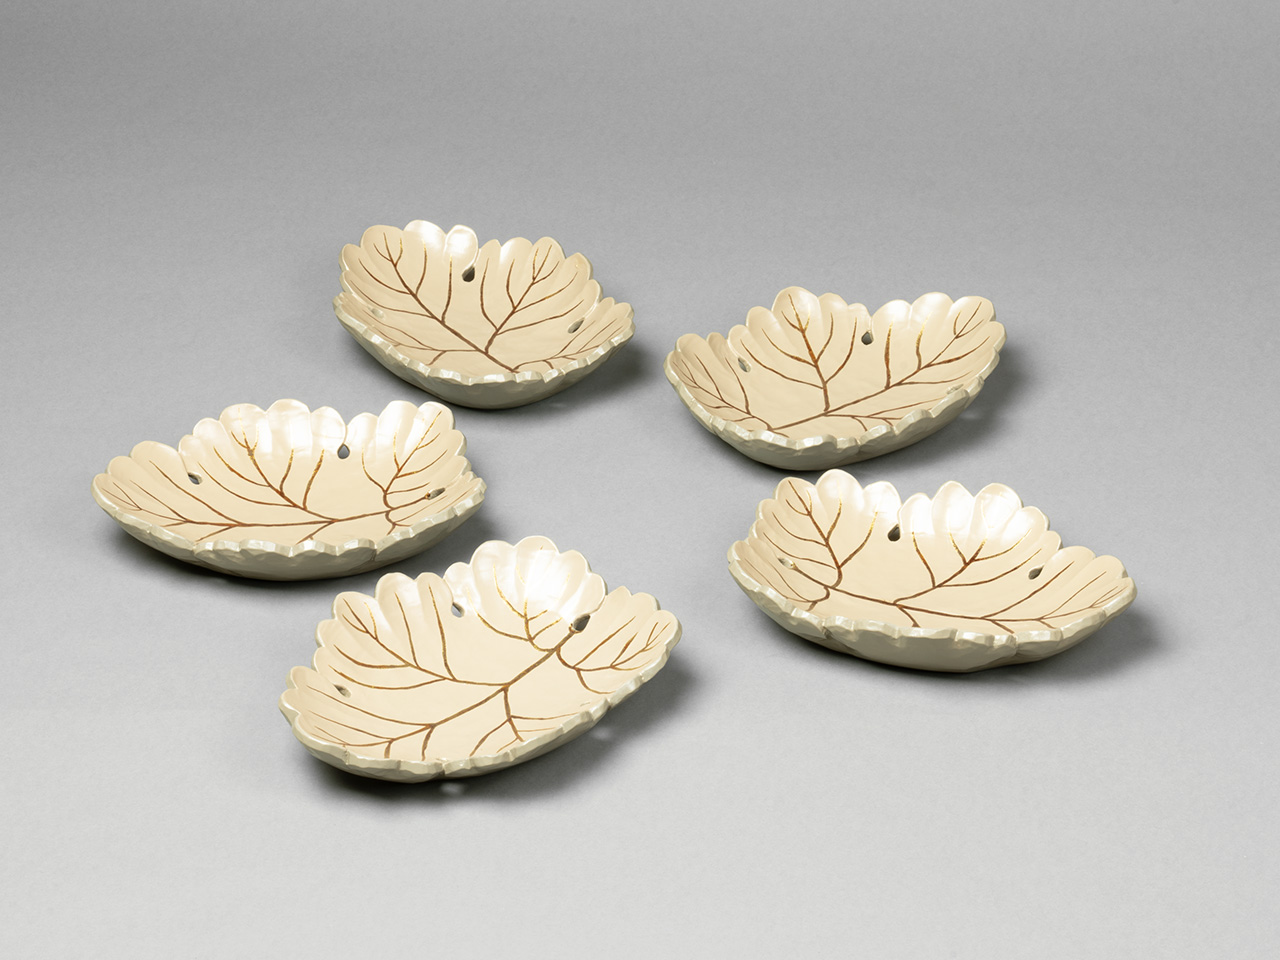 Chrysanthemum Leaf White Lacquer Dishes